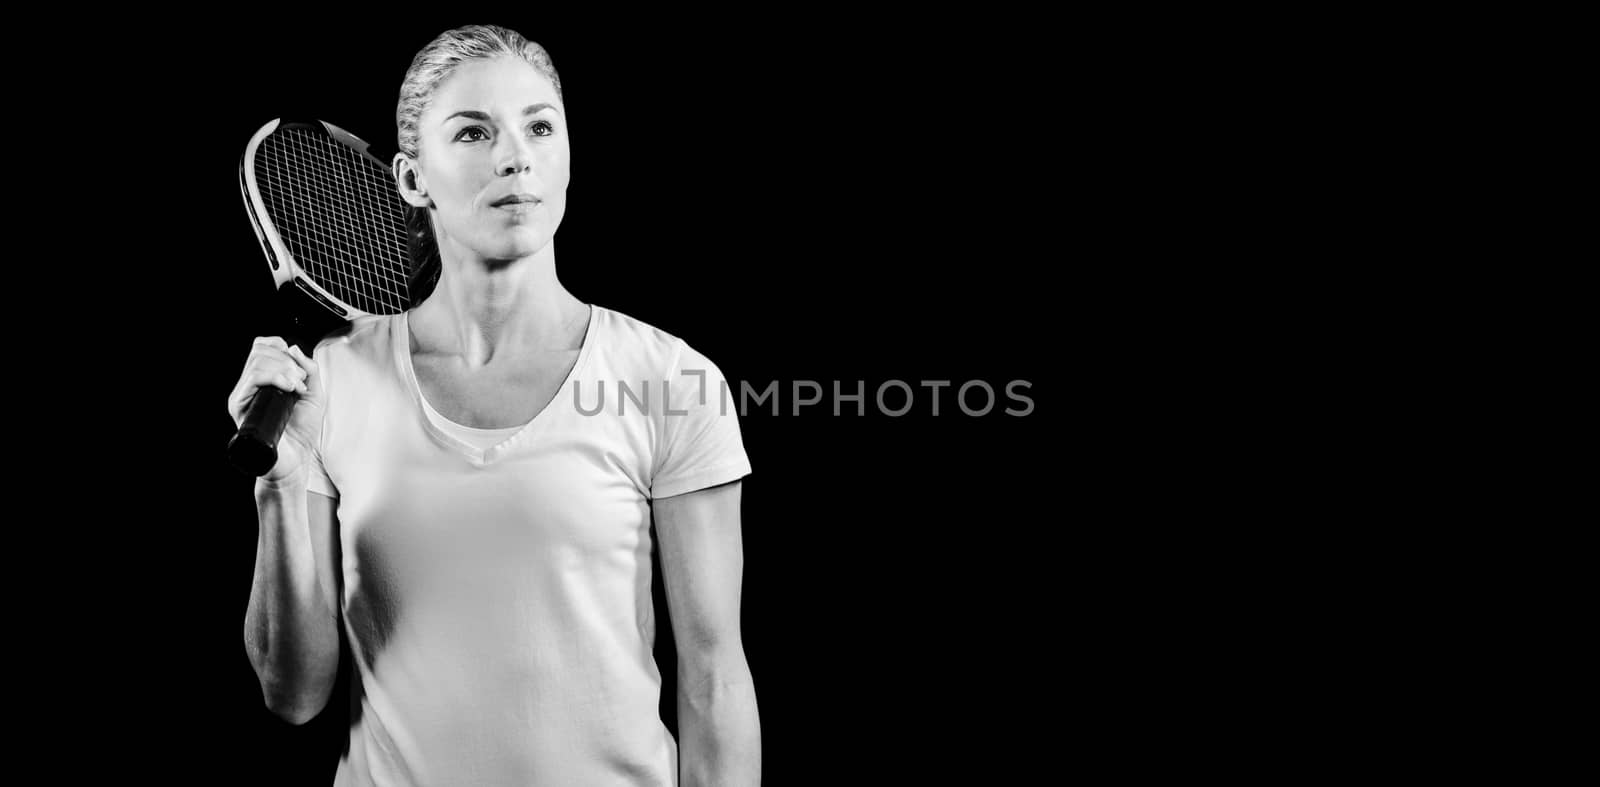 Female tennis player posing with racket on black background